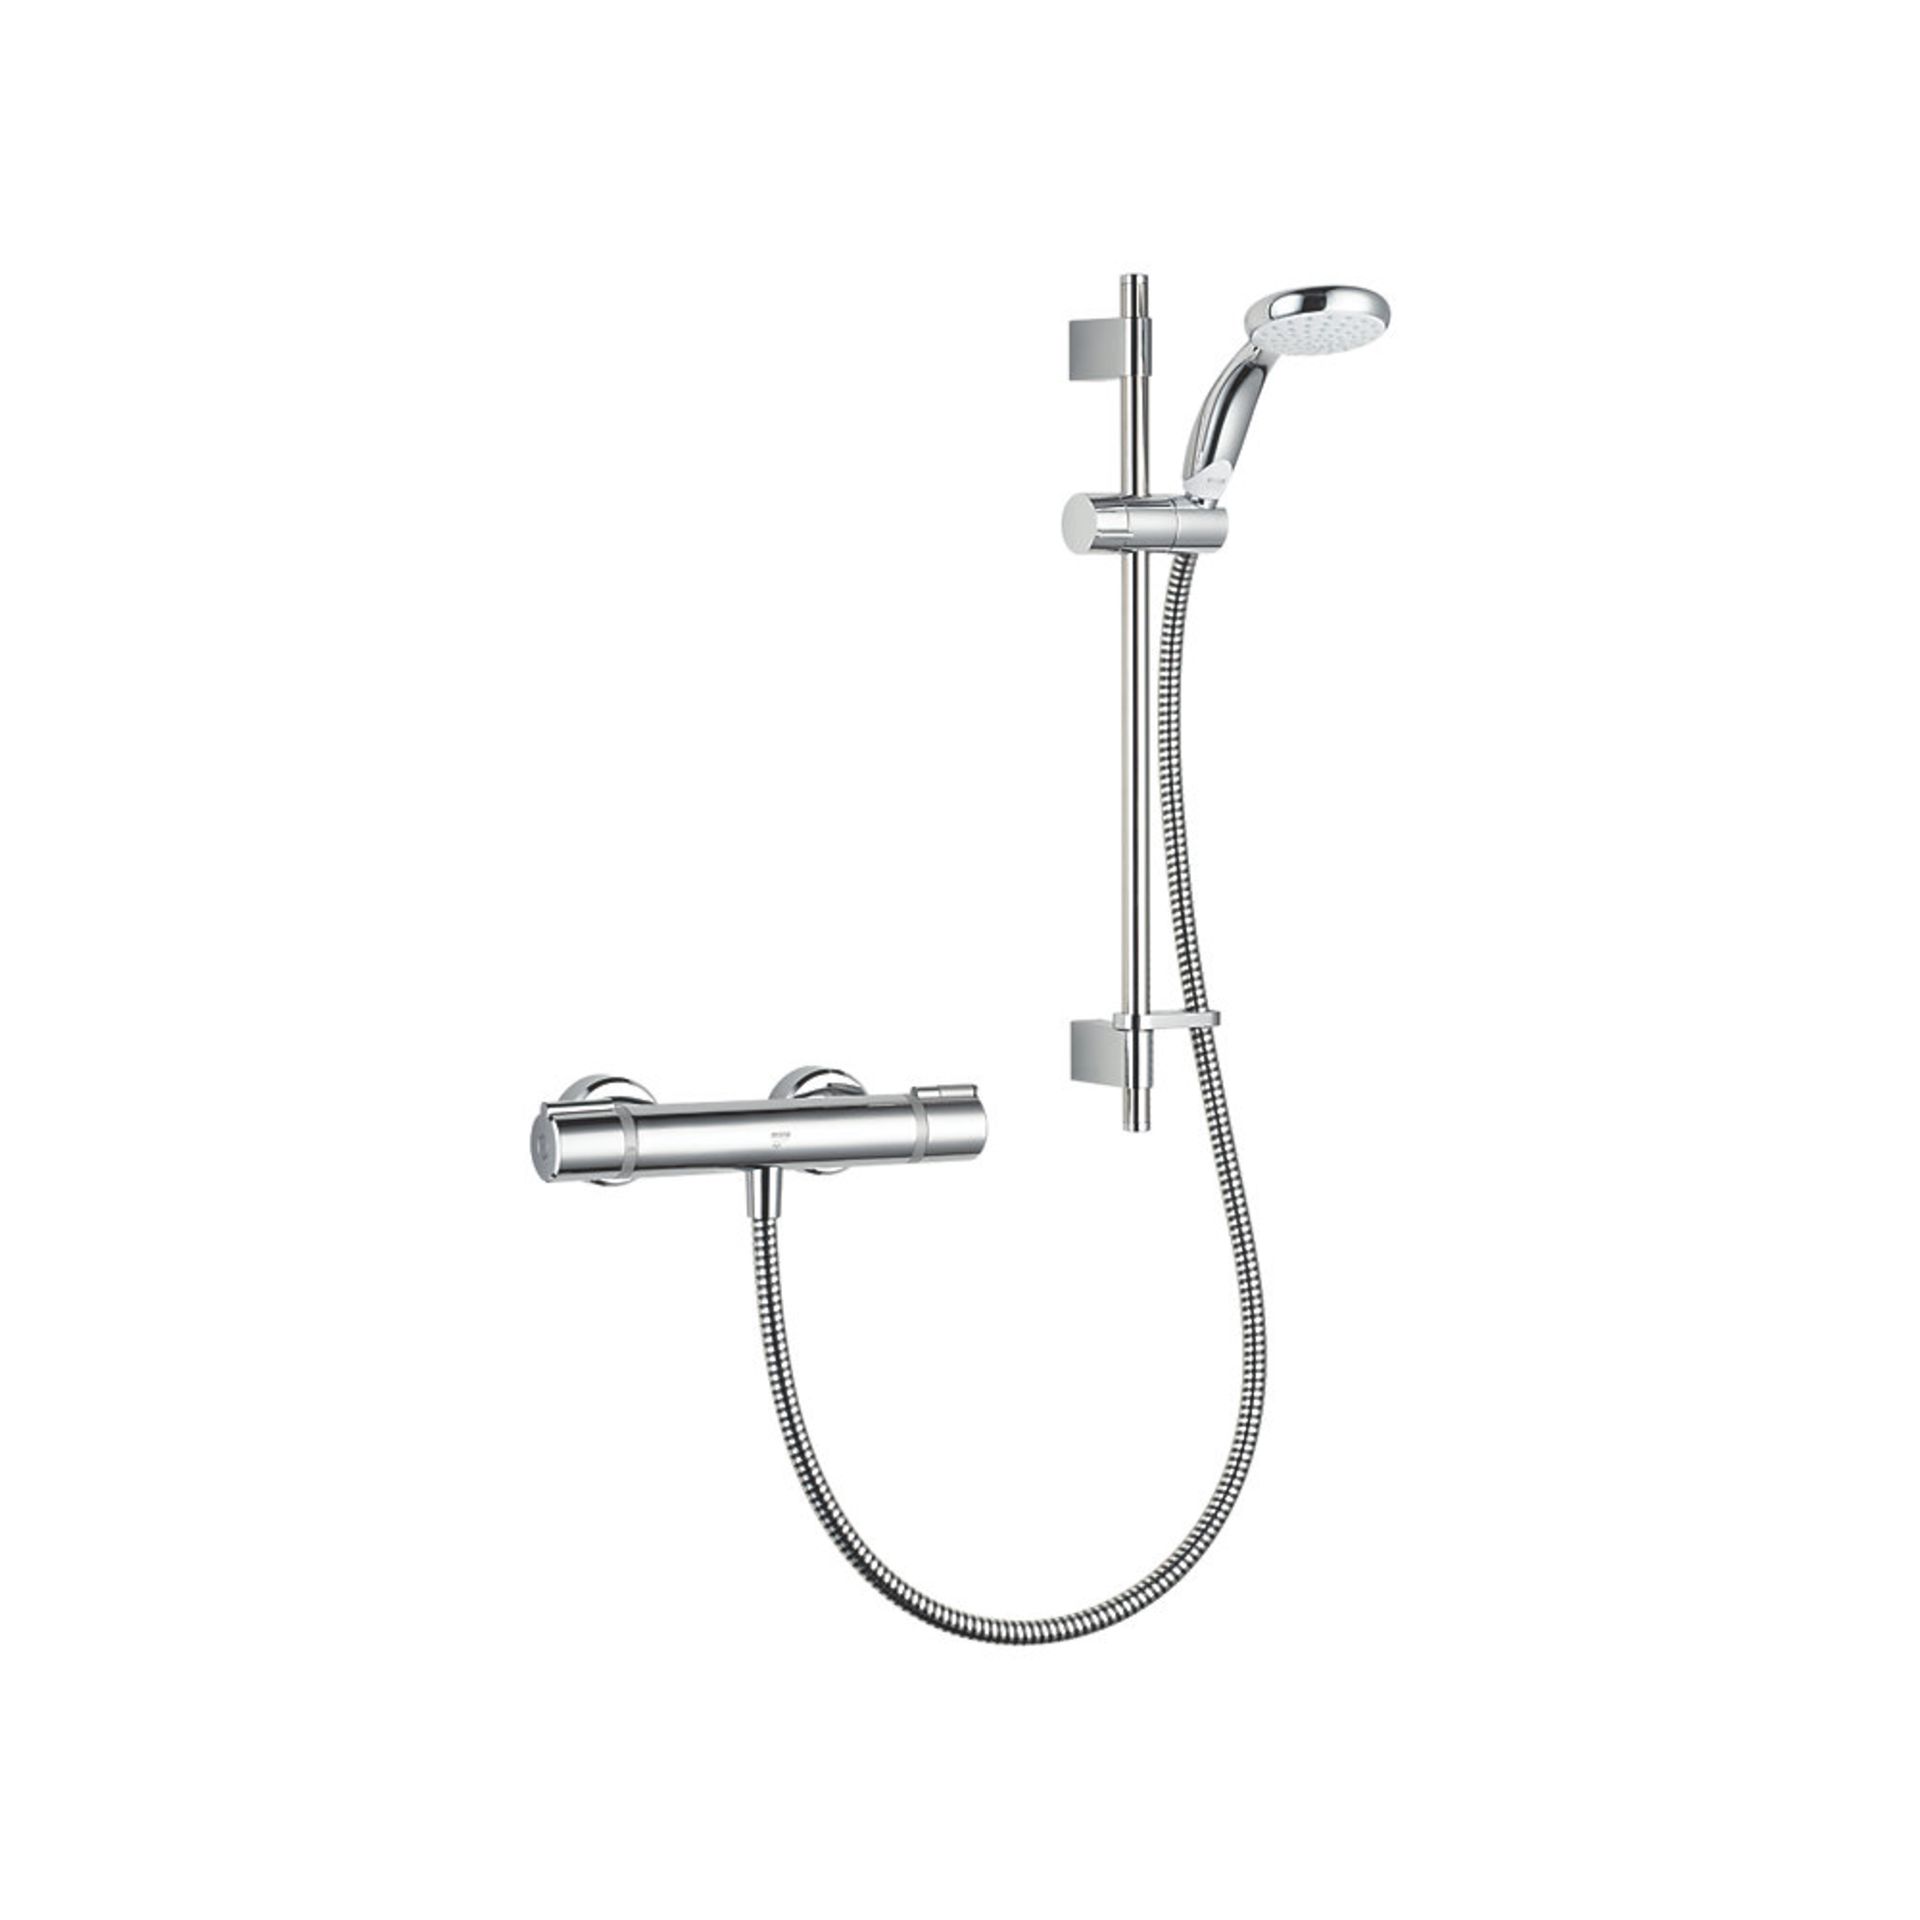 (UK167) Mira Reflex Chrome effect Thermostatic Bar mixer shower. Thermostatic temperature - Image 2 of 2